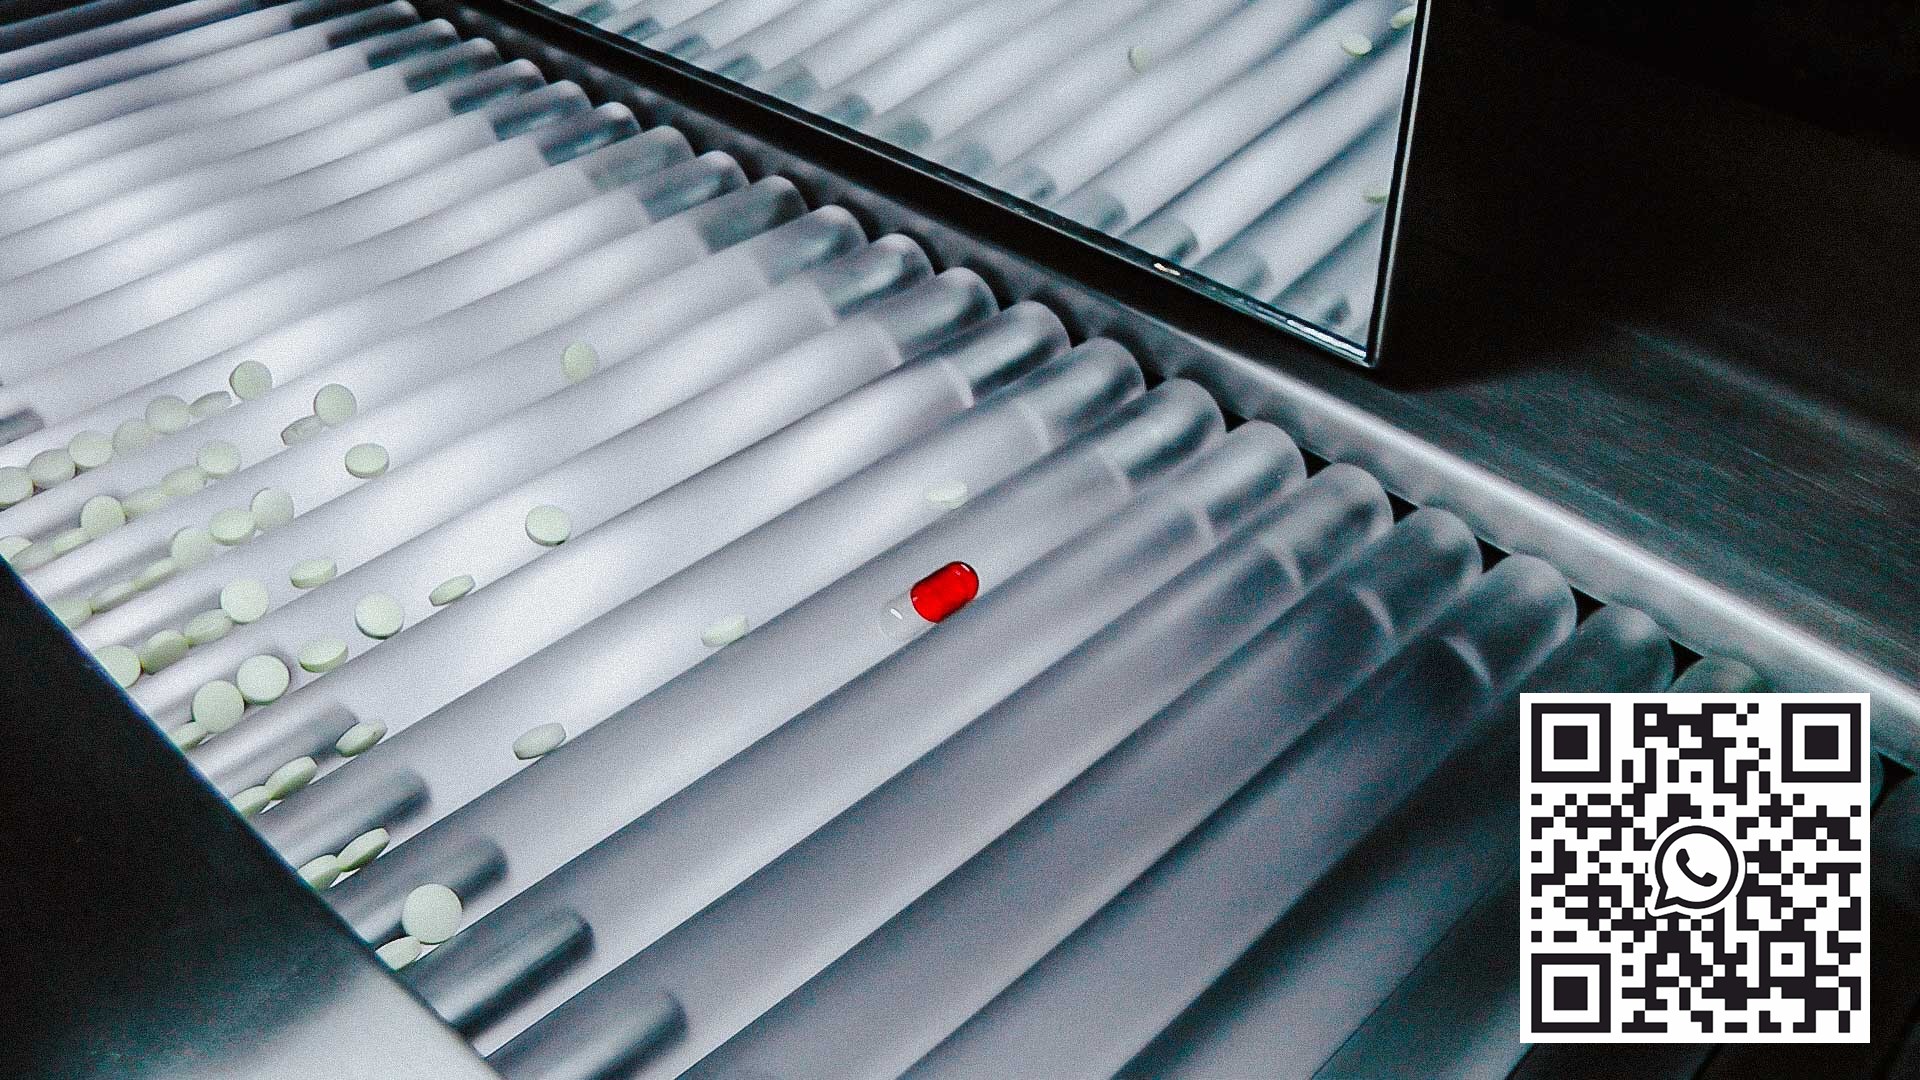 Automatic illuminated table for visual quality control of solid gelatin capsules and tablets